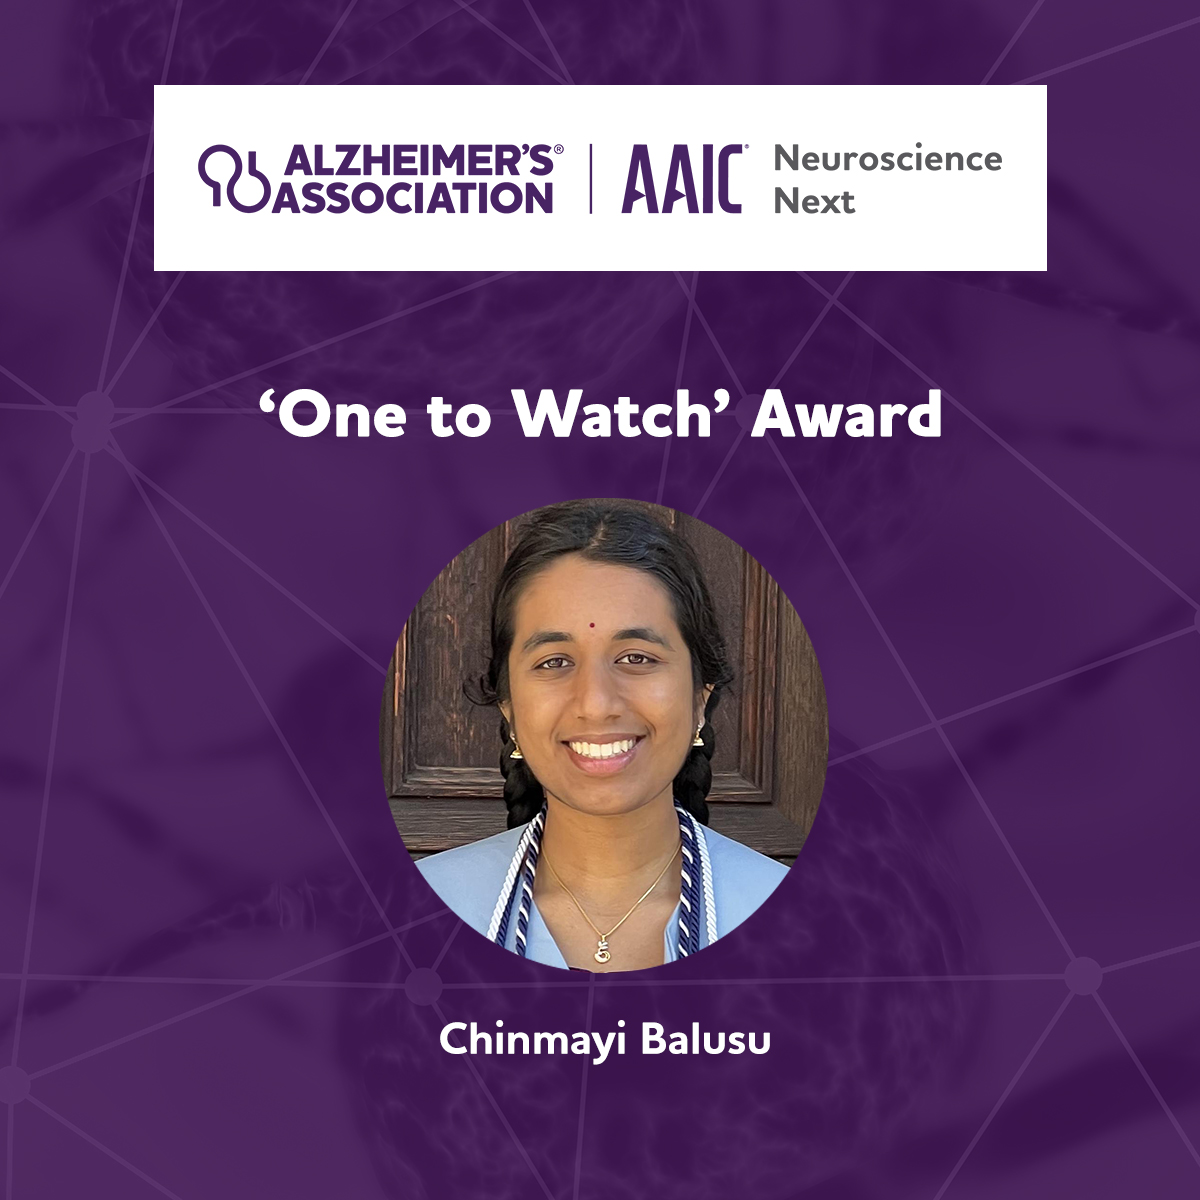 Congratulations to @chinmayi_balusu of @ColumbiaMed, recipient of the #AAICNeuro ‘One to Watch’ Award! Chinmayi is the founder of @SimplyNeurosci and serves in leadership & advisory roles with STEM advocacy platforms such as @500WomenSci, @network_alba, and @neuroethicsinfo.